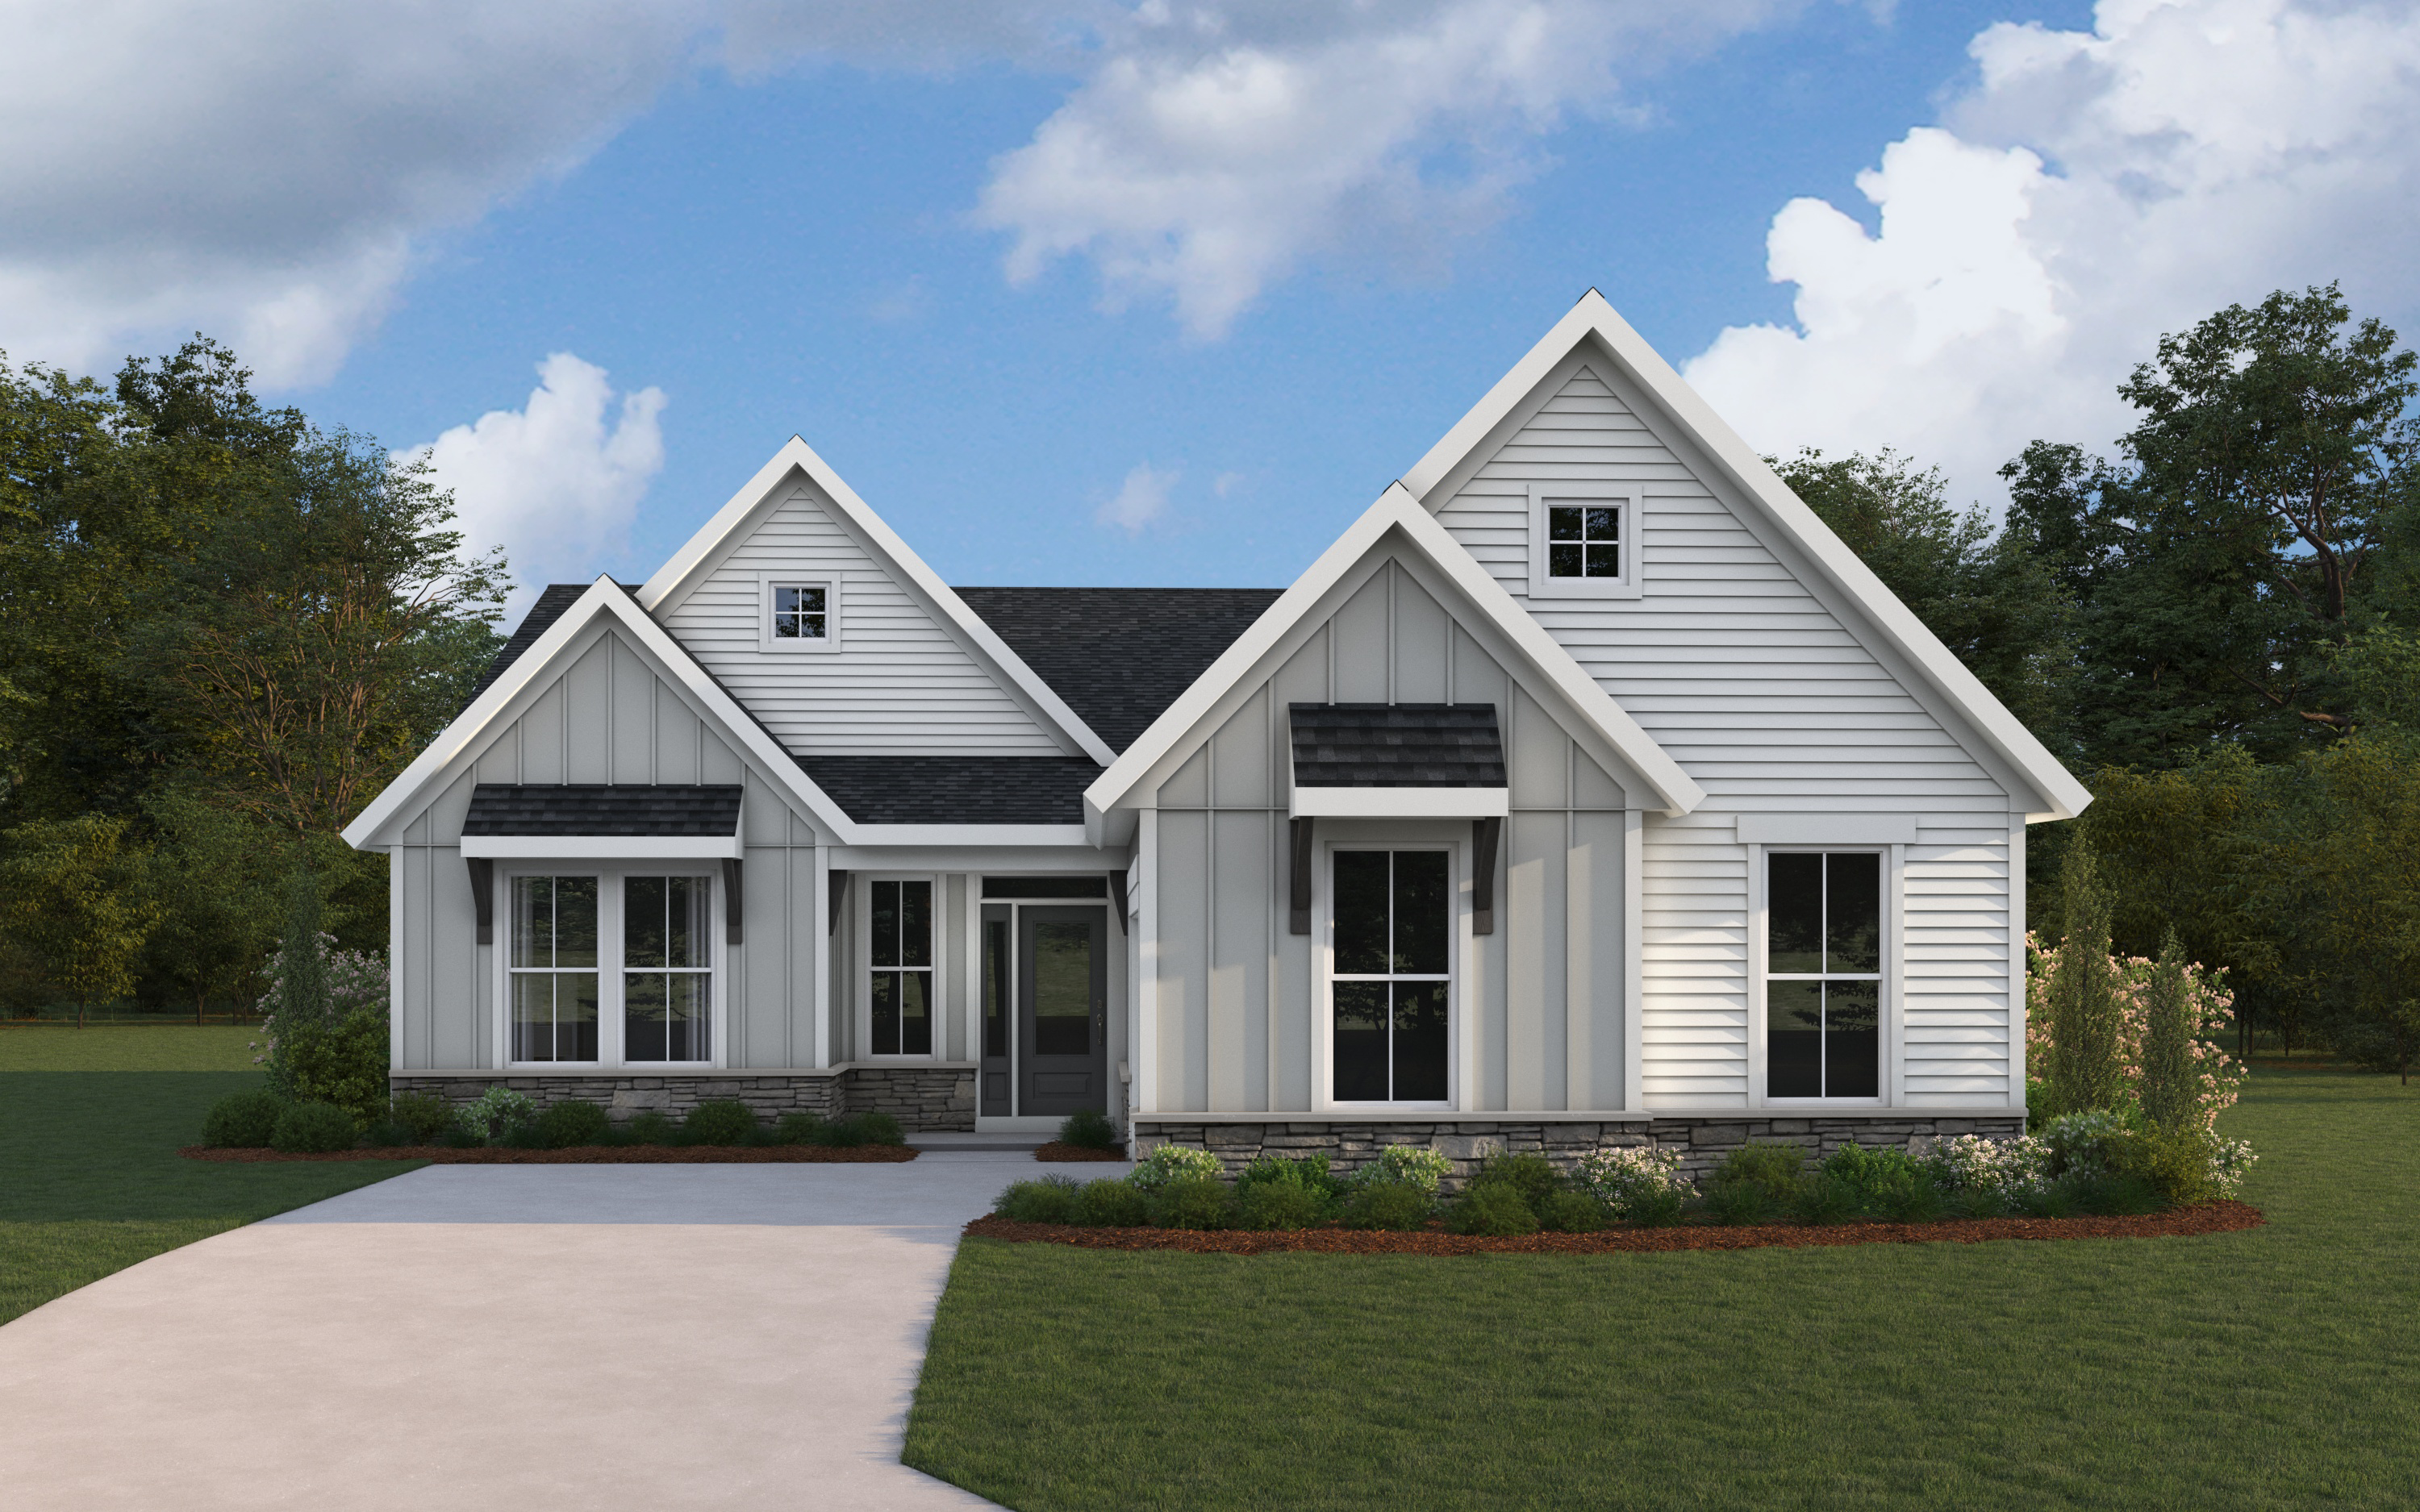 Spring Into Style: 2 New Single-Story Home Designs